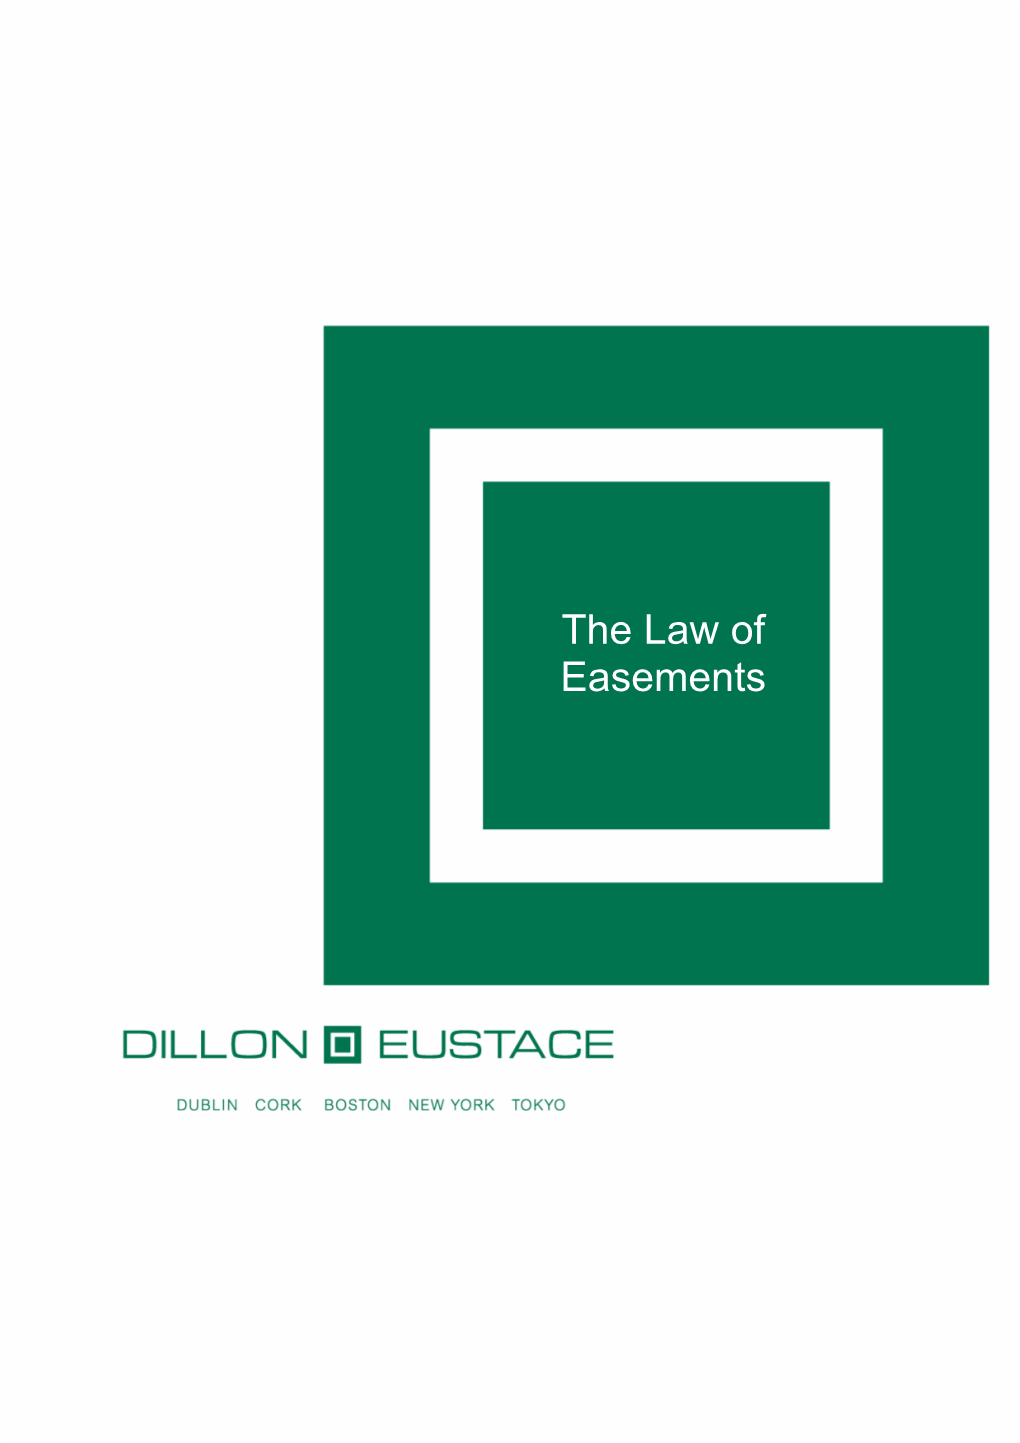 The Law of Easements